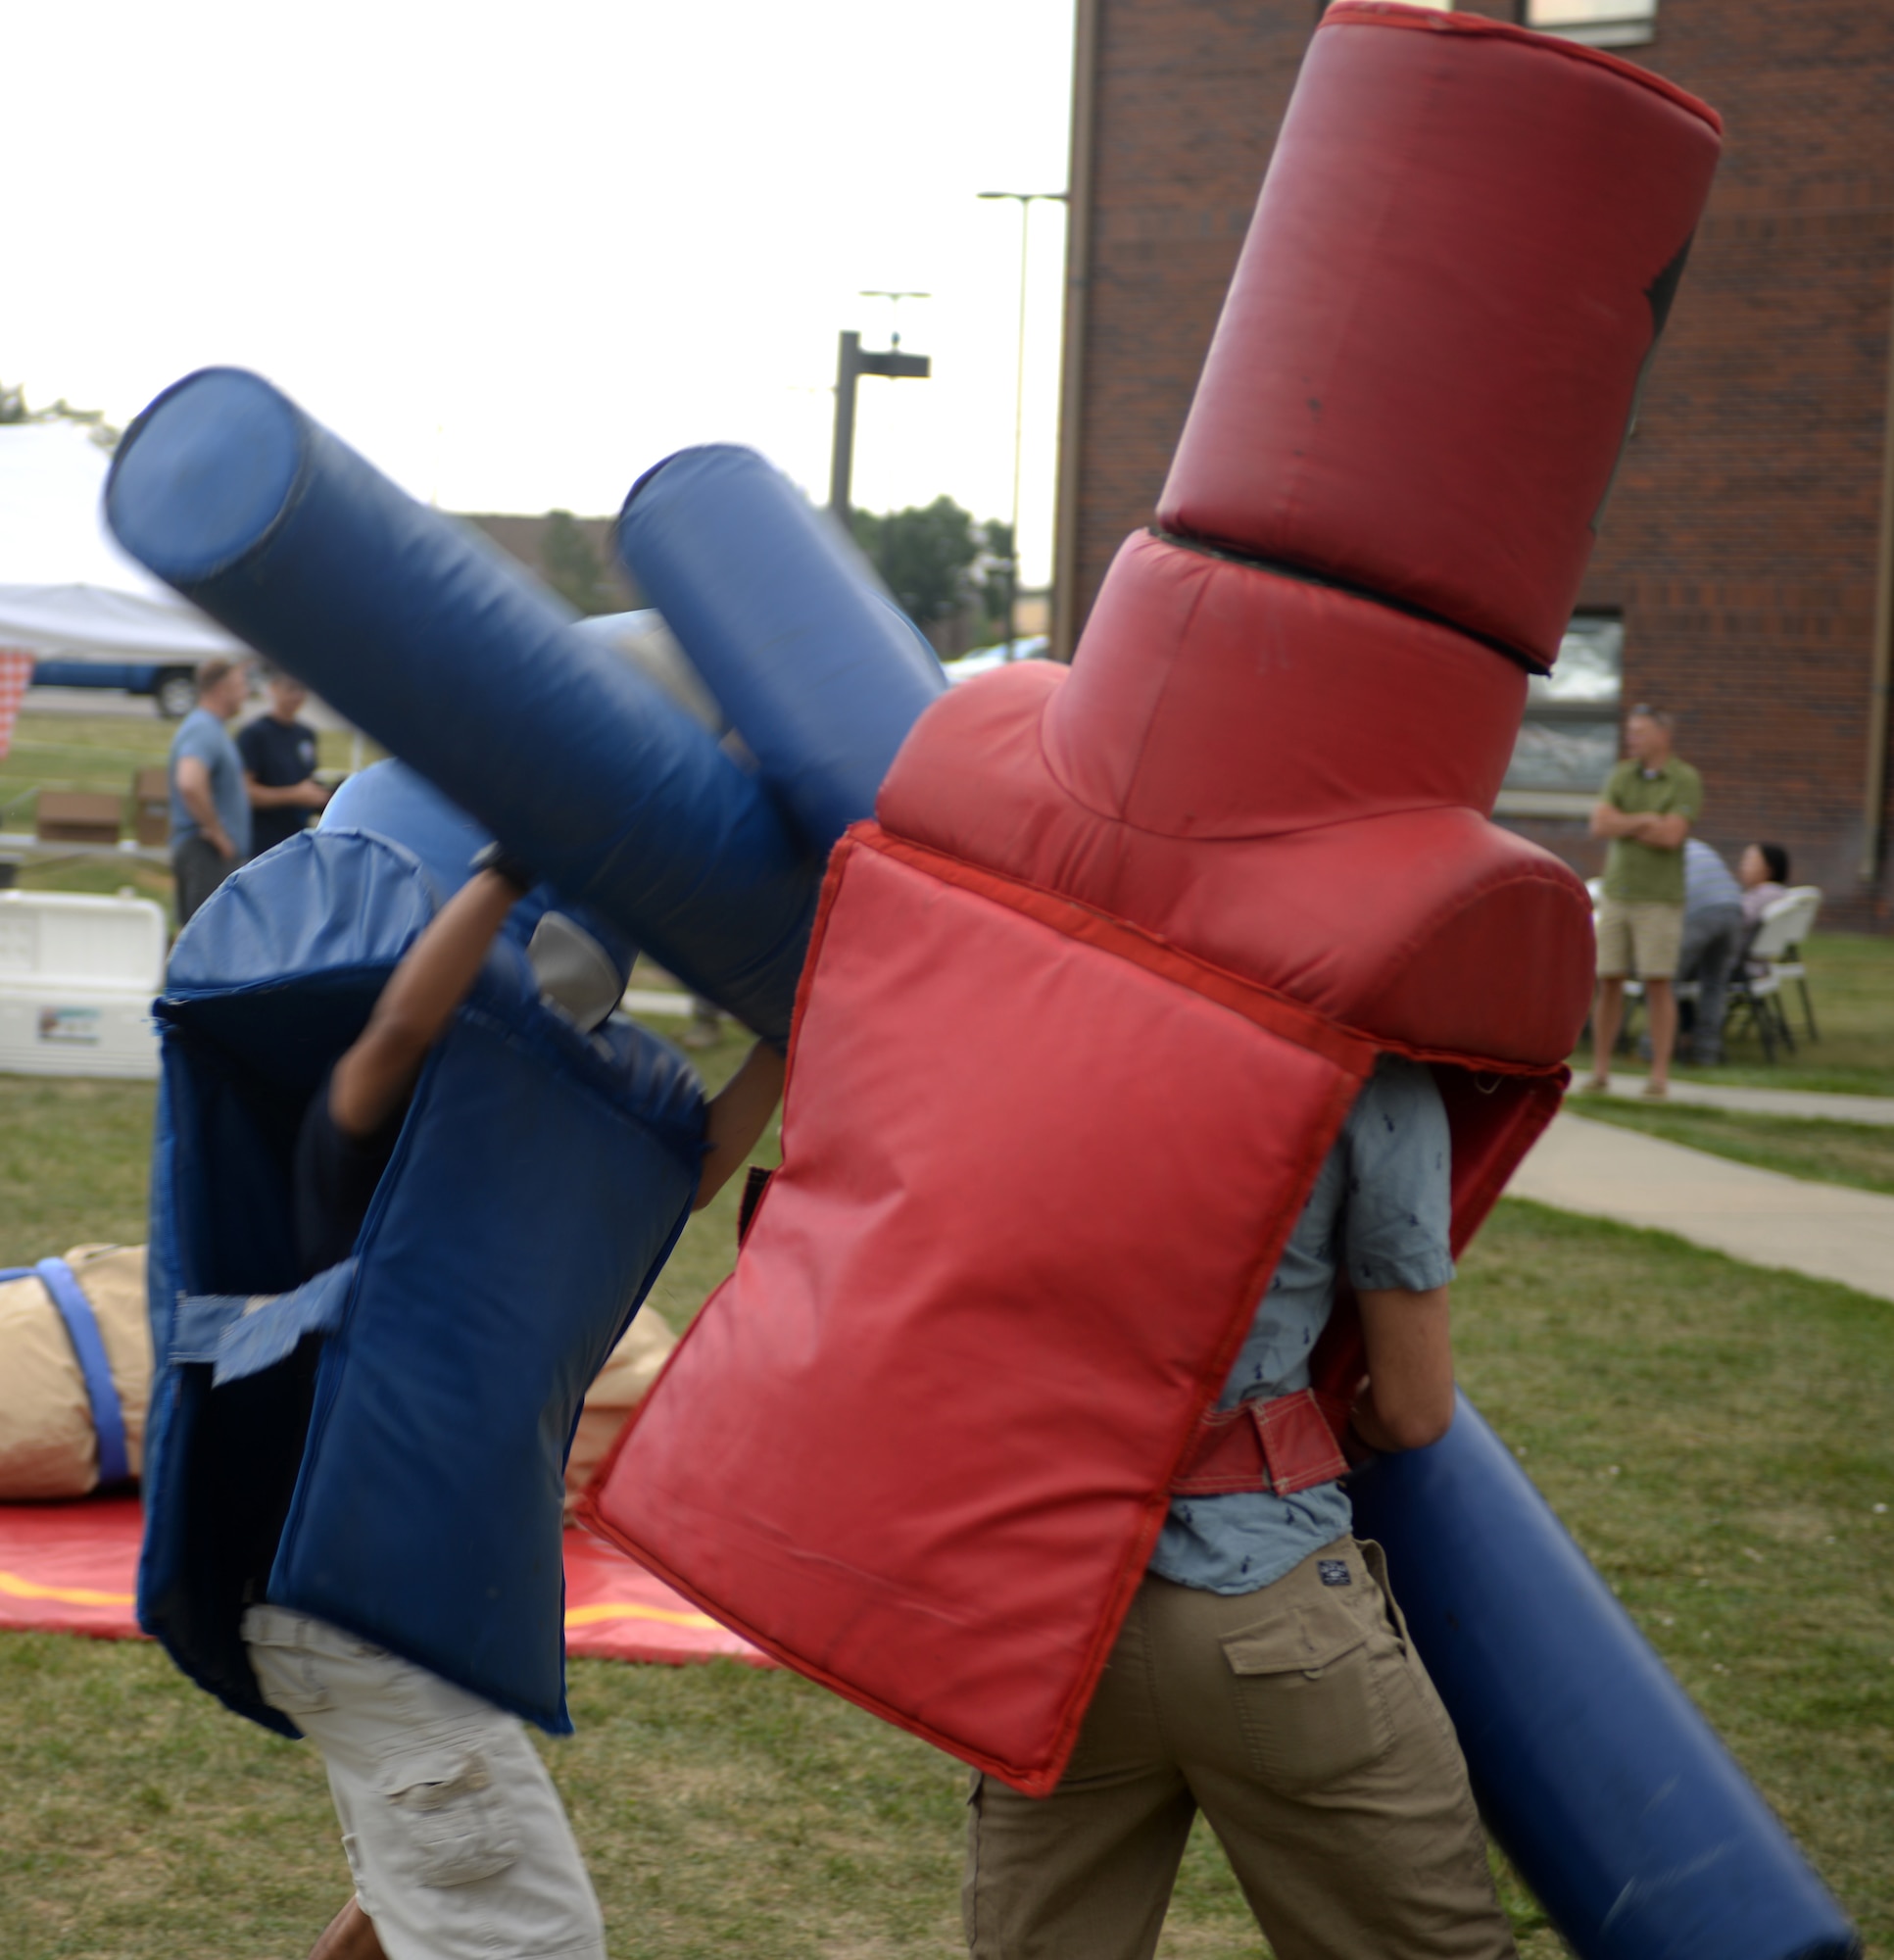 Two Airman challenge each other with pugil sticks at the Summer Bash picnic Aug. 25, 2017 on Ellsworth Air Force Base, S.D. There were multiple games played at the base picnic, including wrestling in Sumo suits, cornhole, horseshoe tossing, and volleyball. (U.S. Air Force photo by Airman 1st Class Thomas Karol)